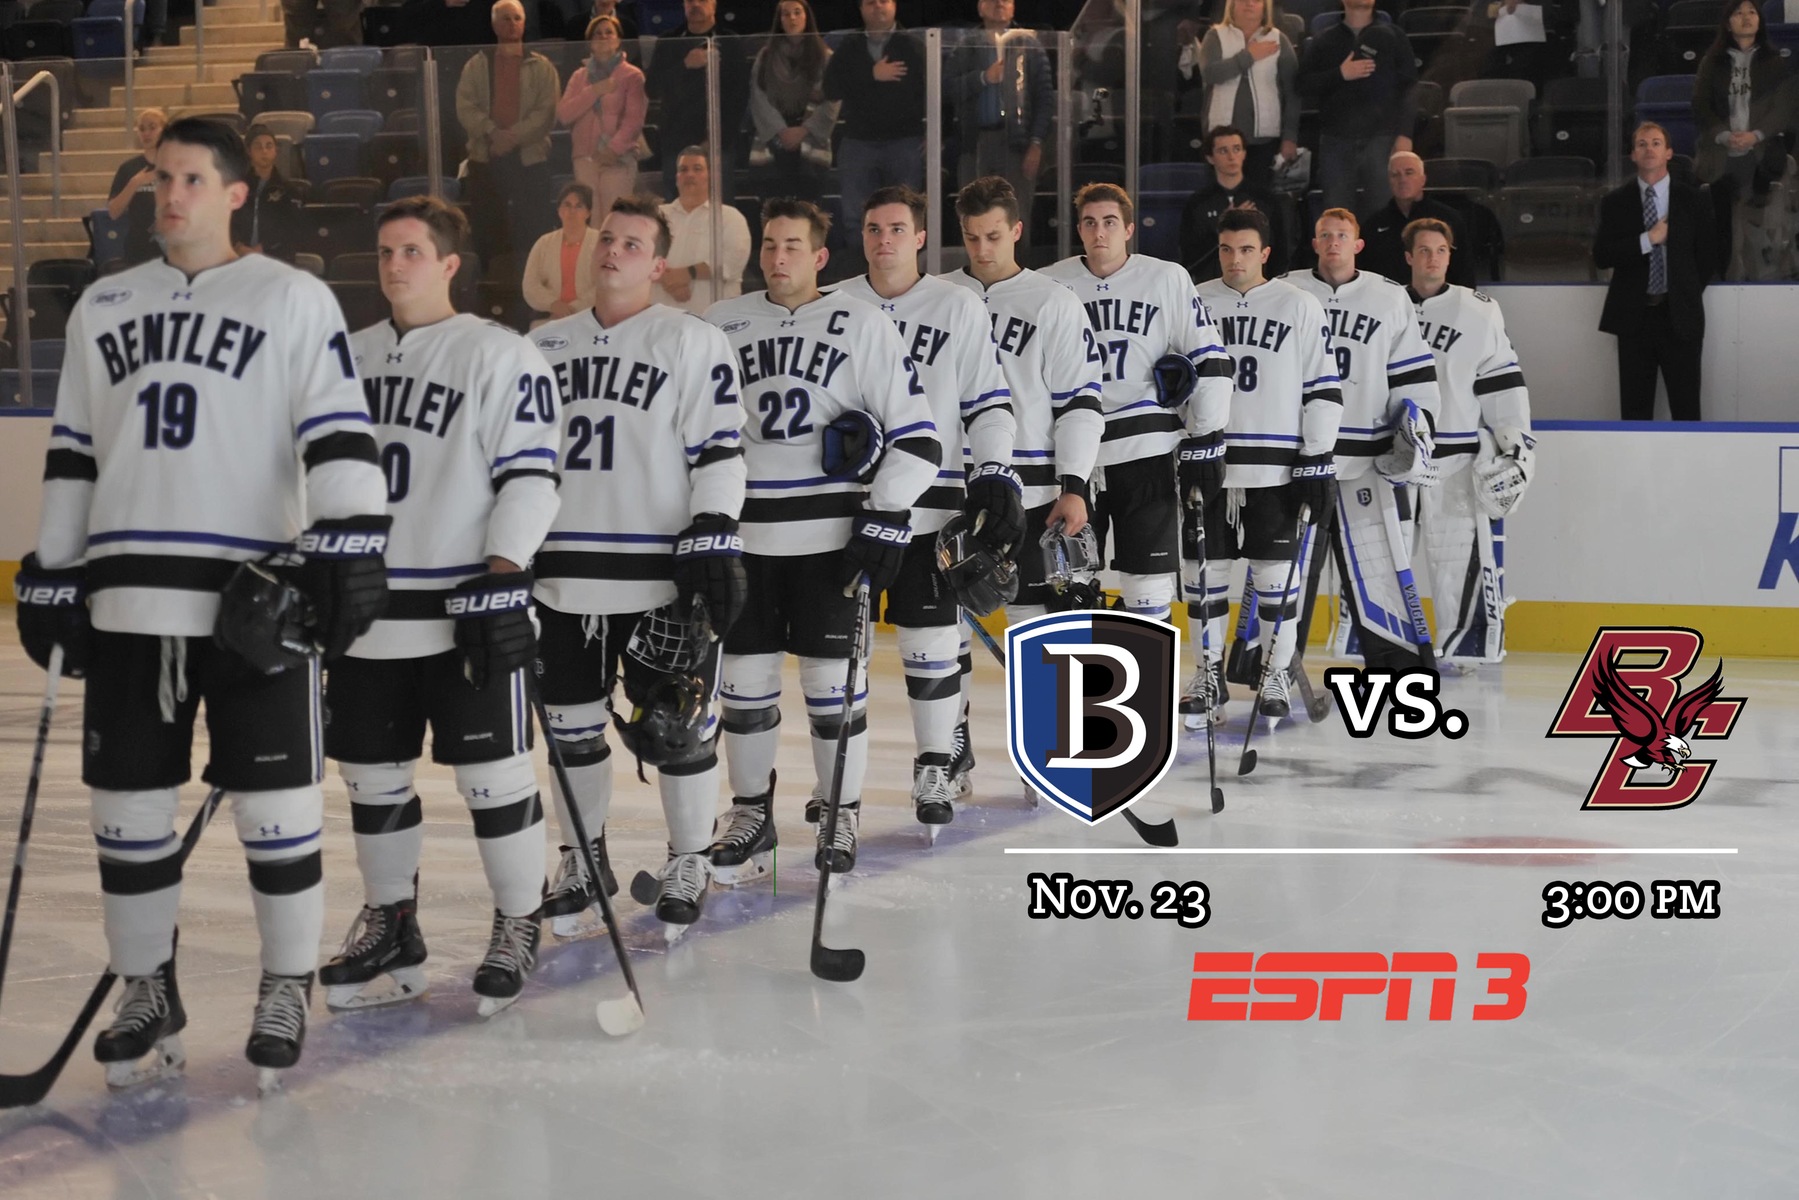 Bentley Visits BC Friday Afternoon in First Ever Matchup; Game on ESPN3